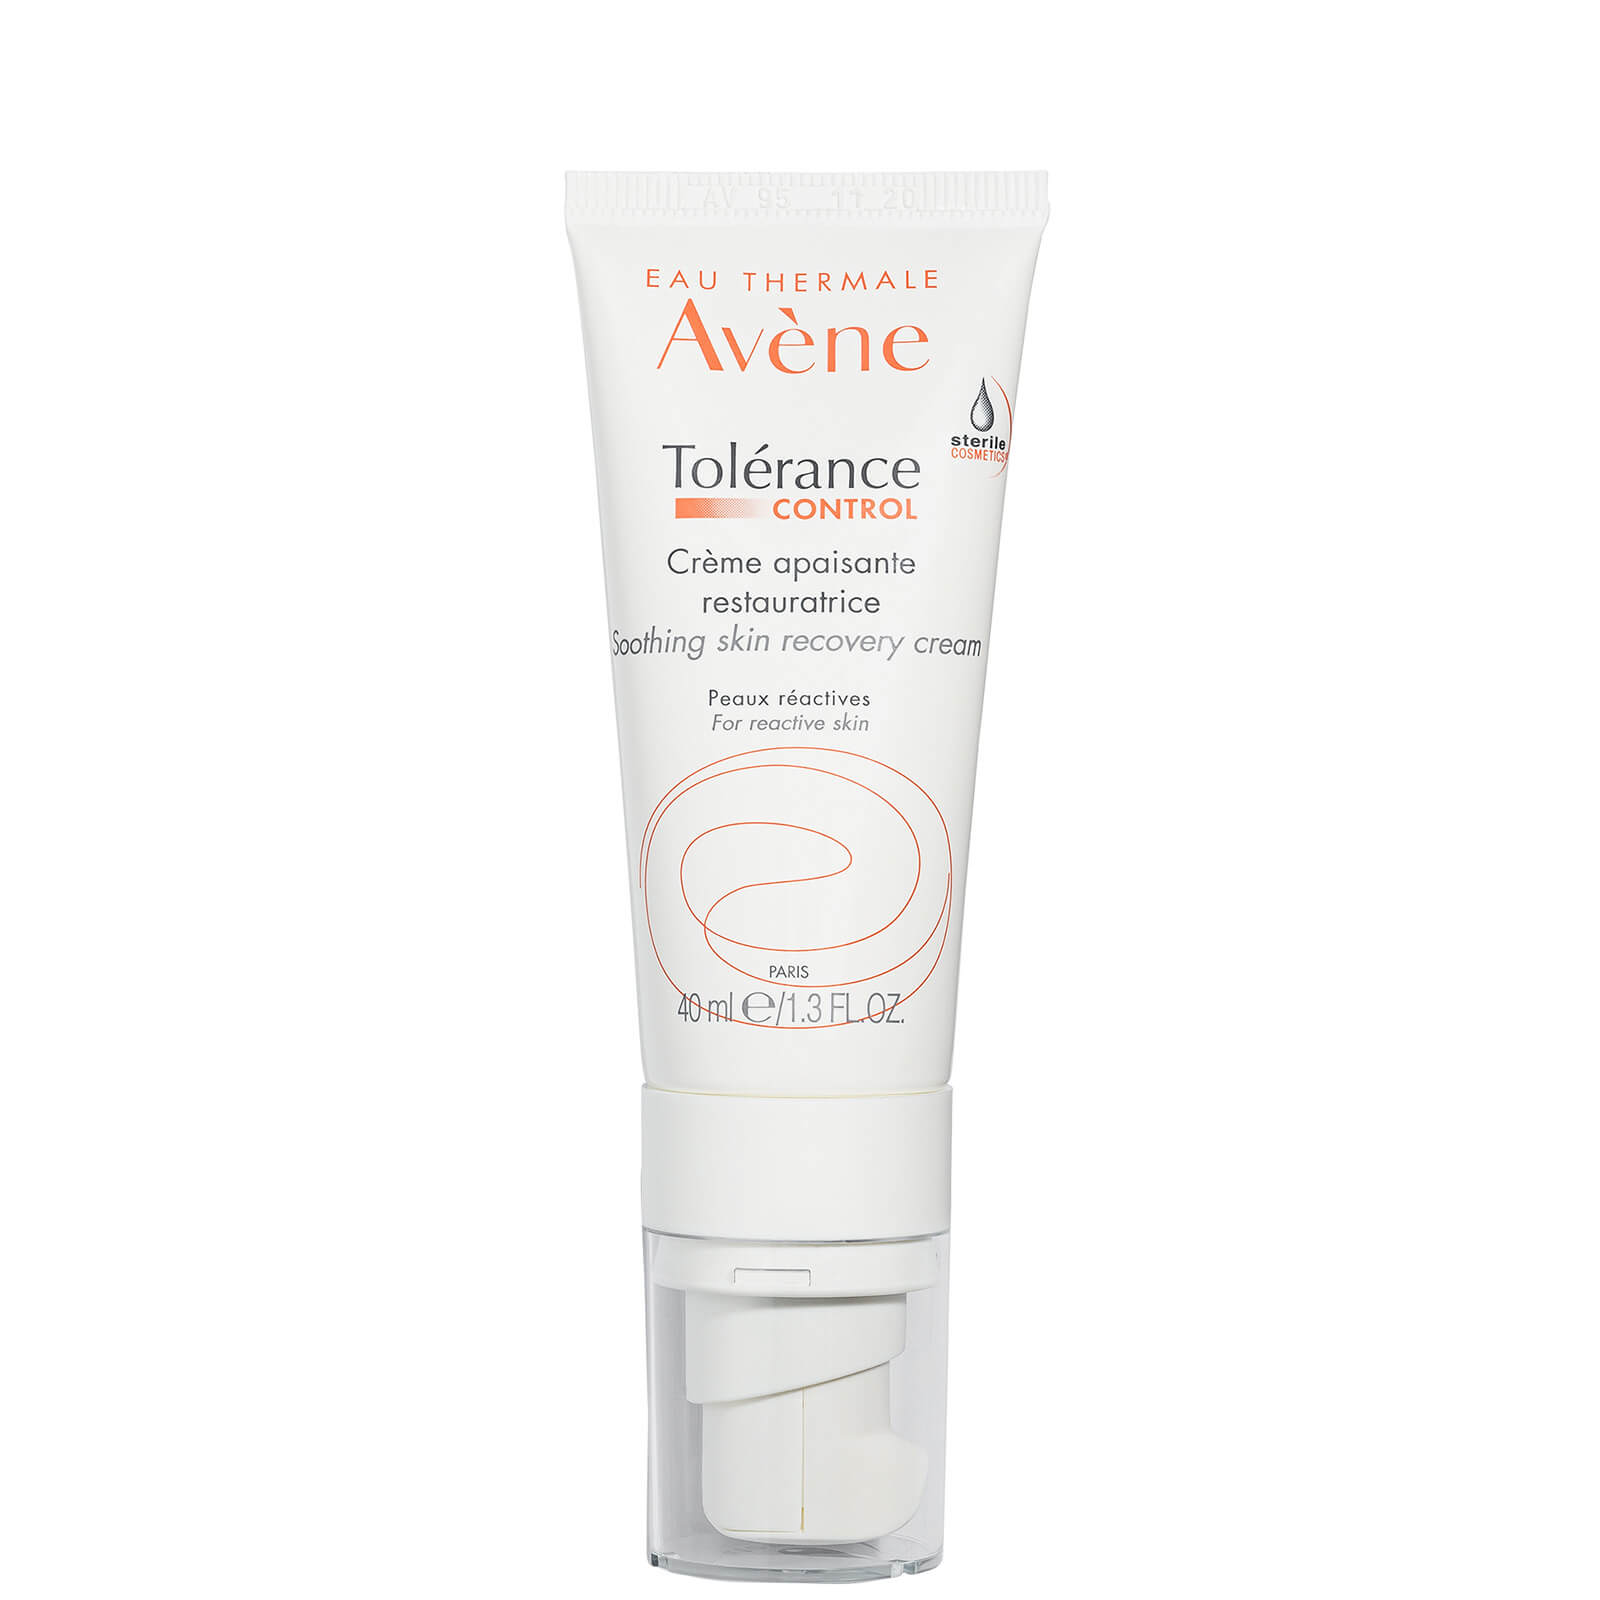 Photos - Cream / Lotion Avene Avène Tolerance Control Soothing Skin Recovery Cream for Sensitive Skin 40 